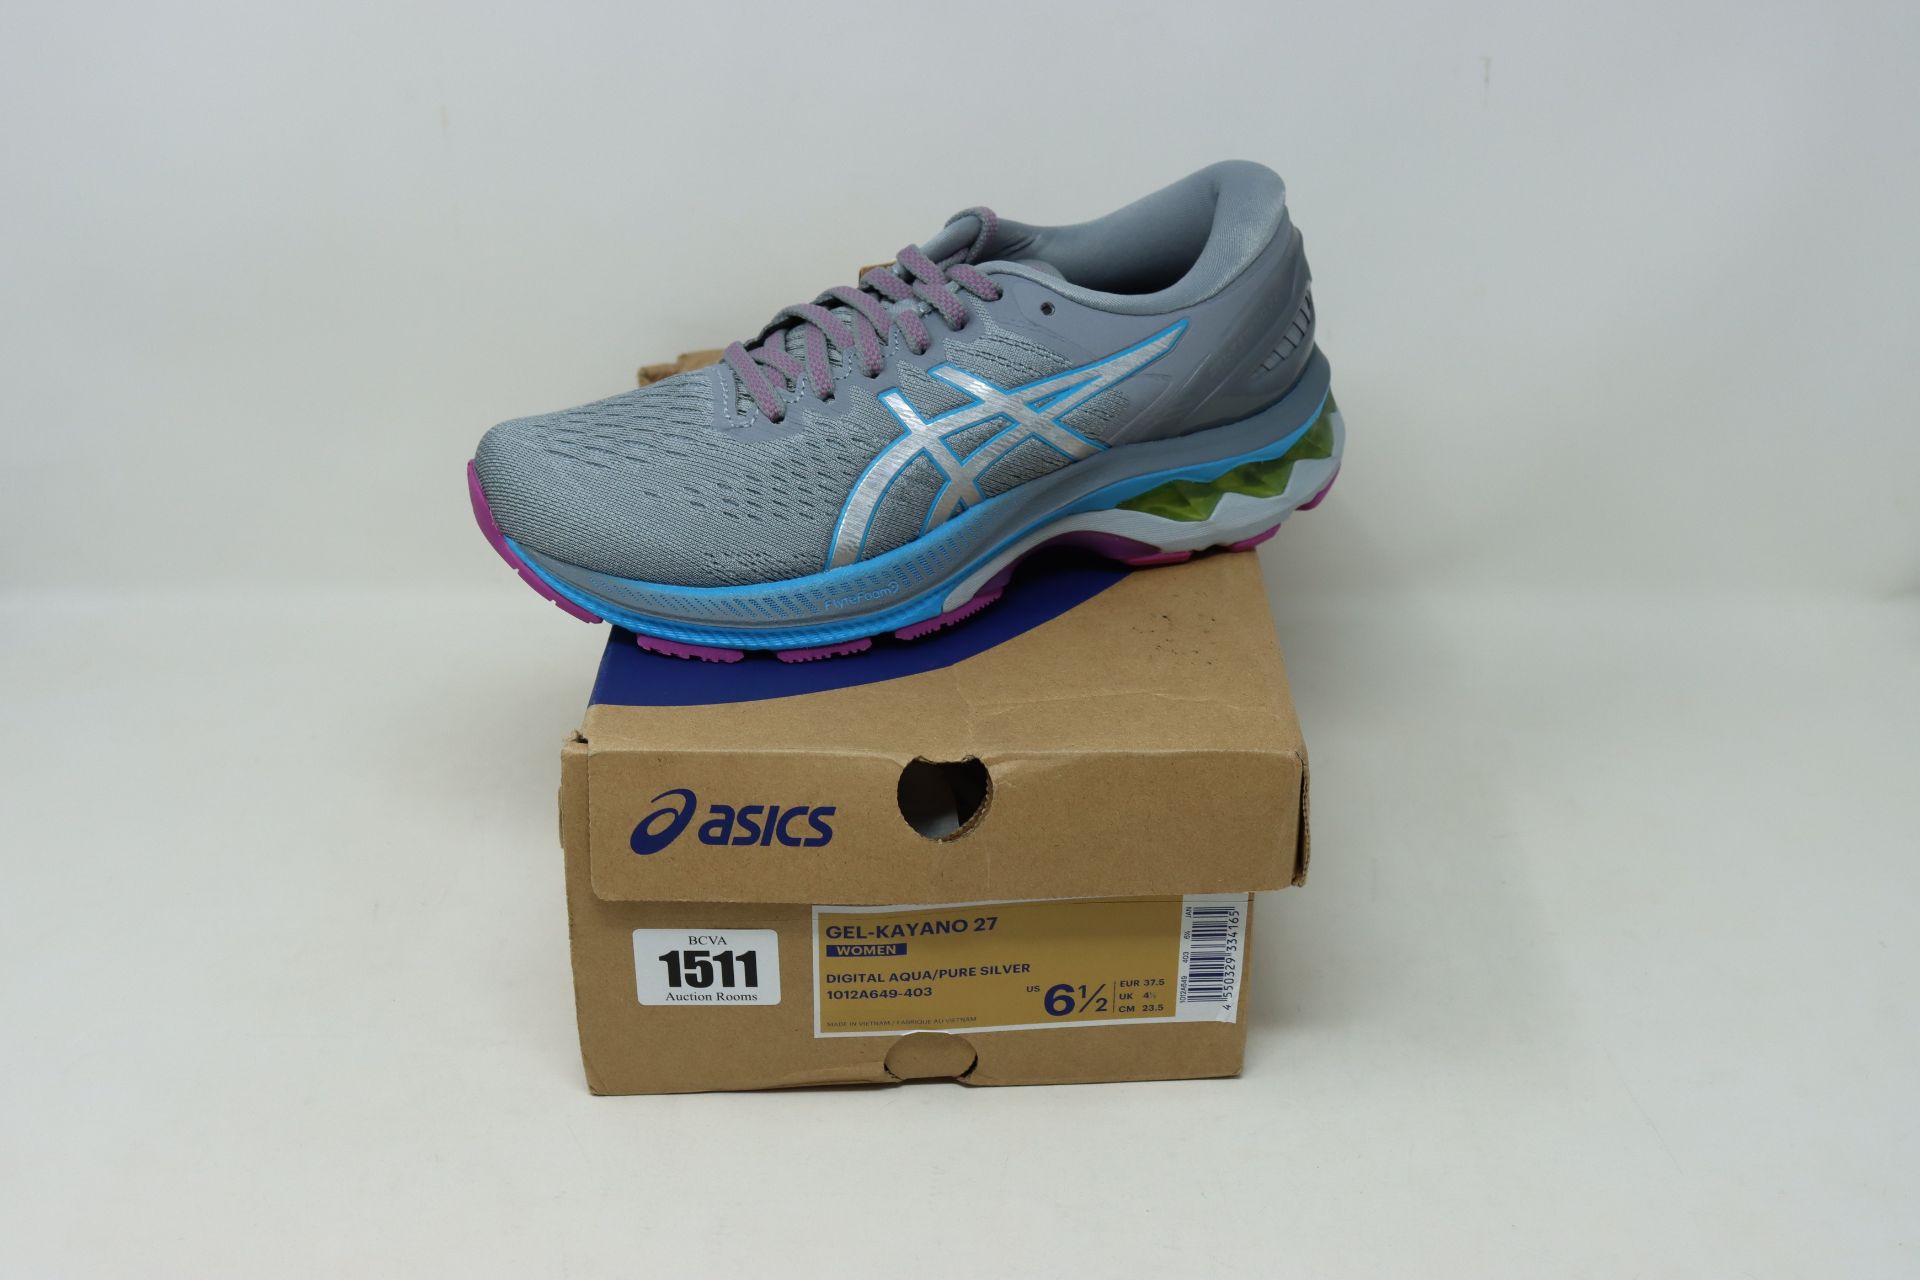 A pair of women's as new Asics Gel-Kayano 27 trainers (UK 4.5).